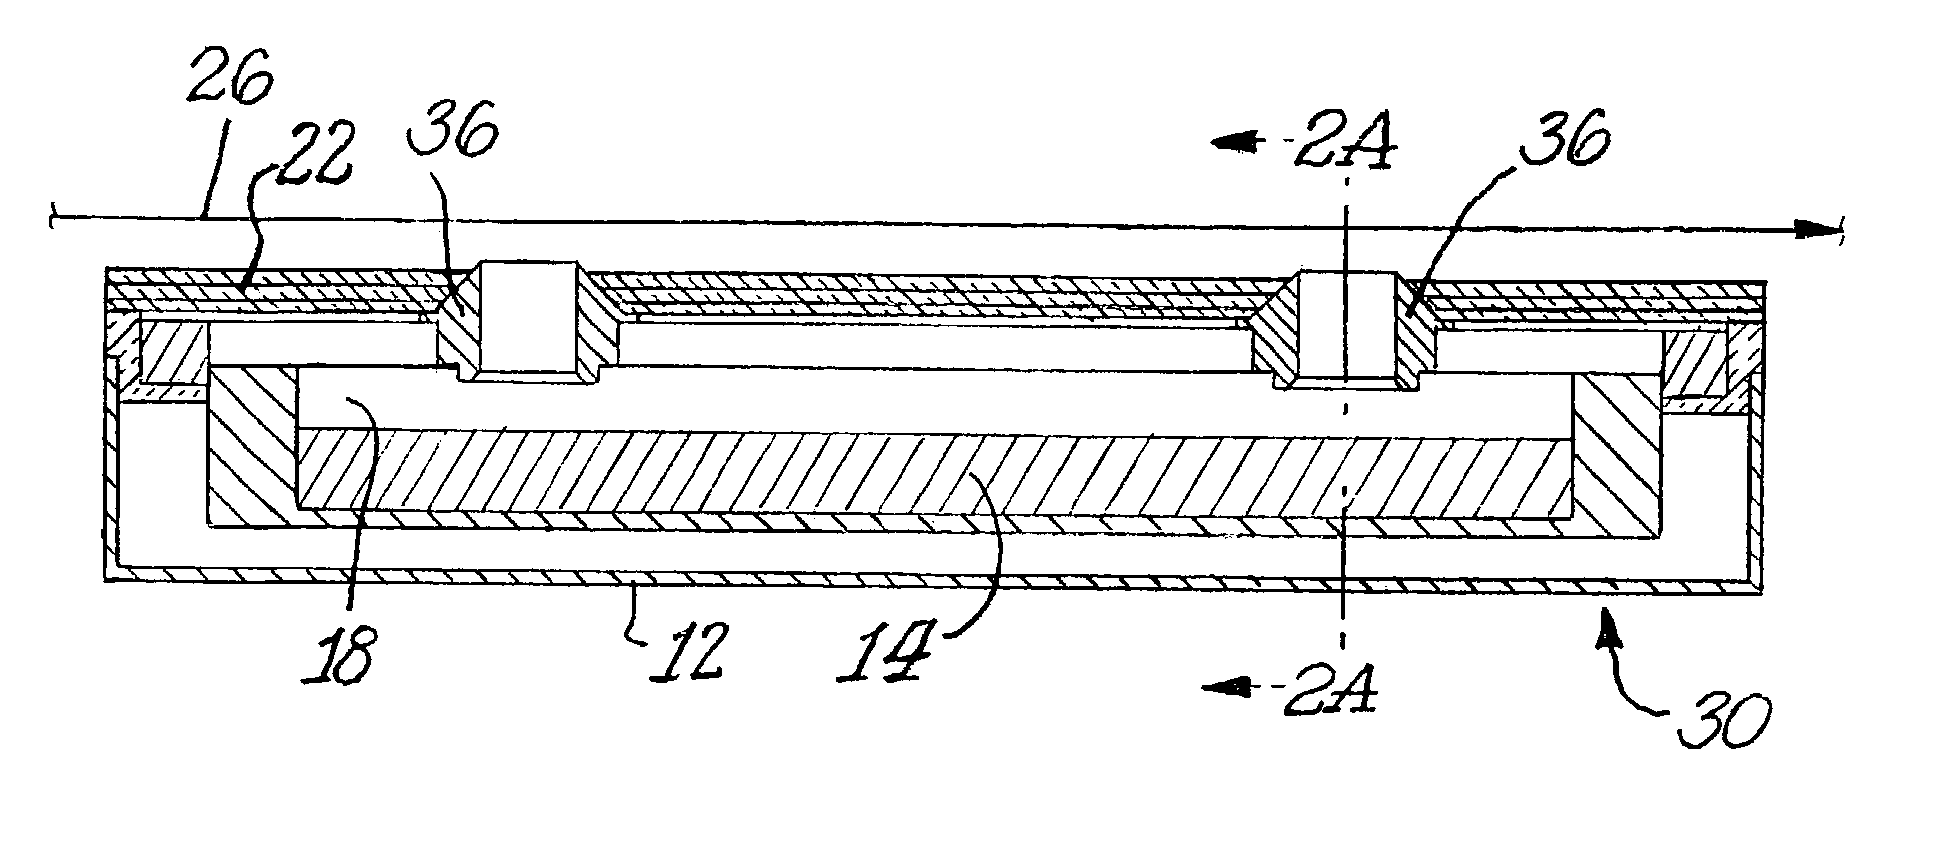 Multiple-nozzle thermal evaporation source